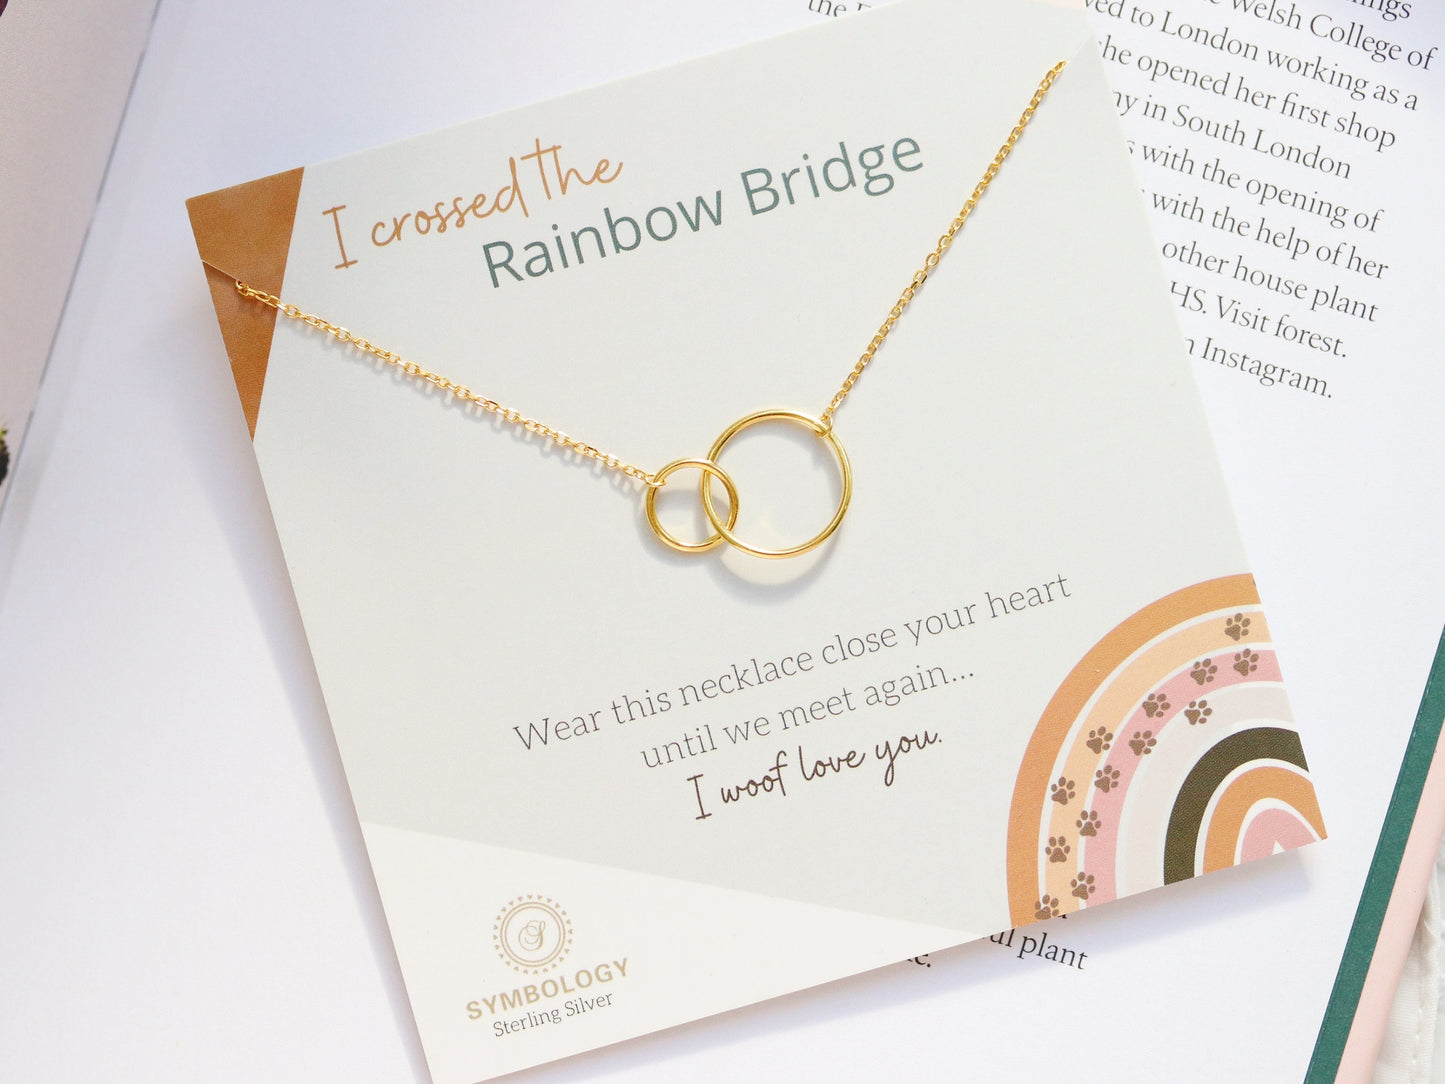 Sterling Silver I Crossed the Rainbow Bridge Necklace, Silver Double Circle Necklace, Interlinked Love Heart Necklace, Pet loss memorial